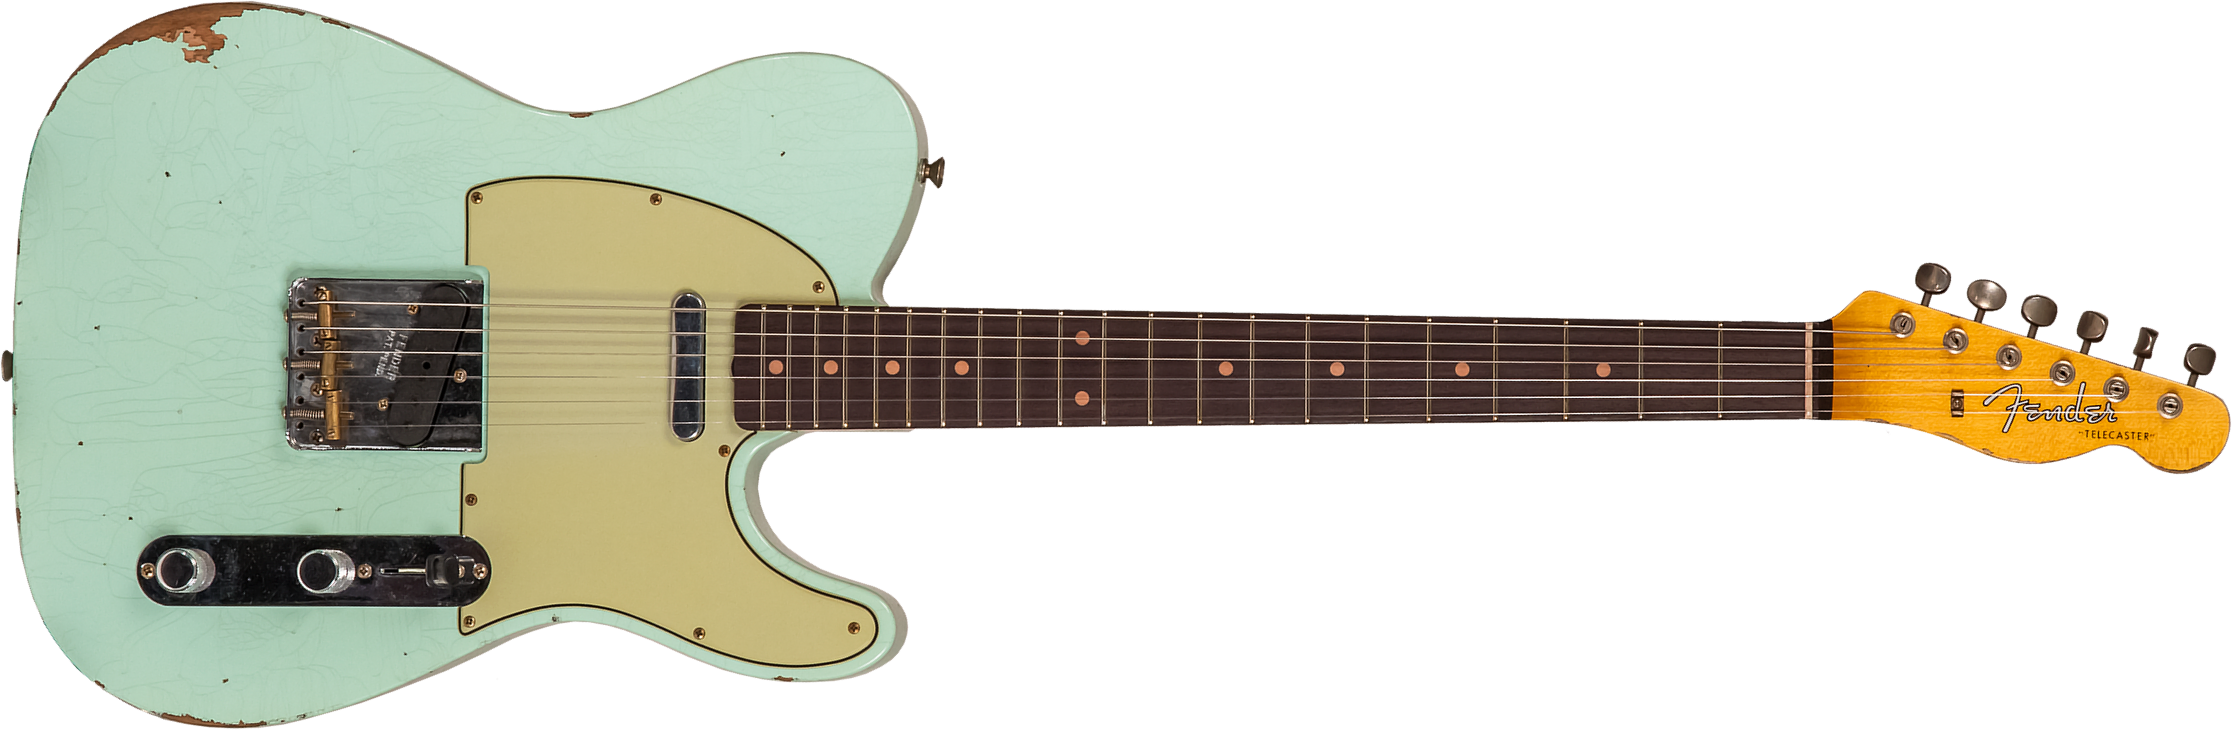 Fender Custom Shop Tele 1961 2s Ht Rw #cz565334 - Relic Faded Surf Green - Tel shape electric guitar - Main picture